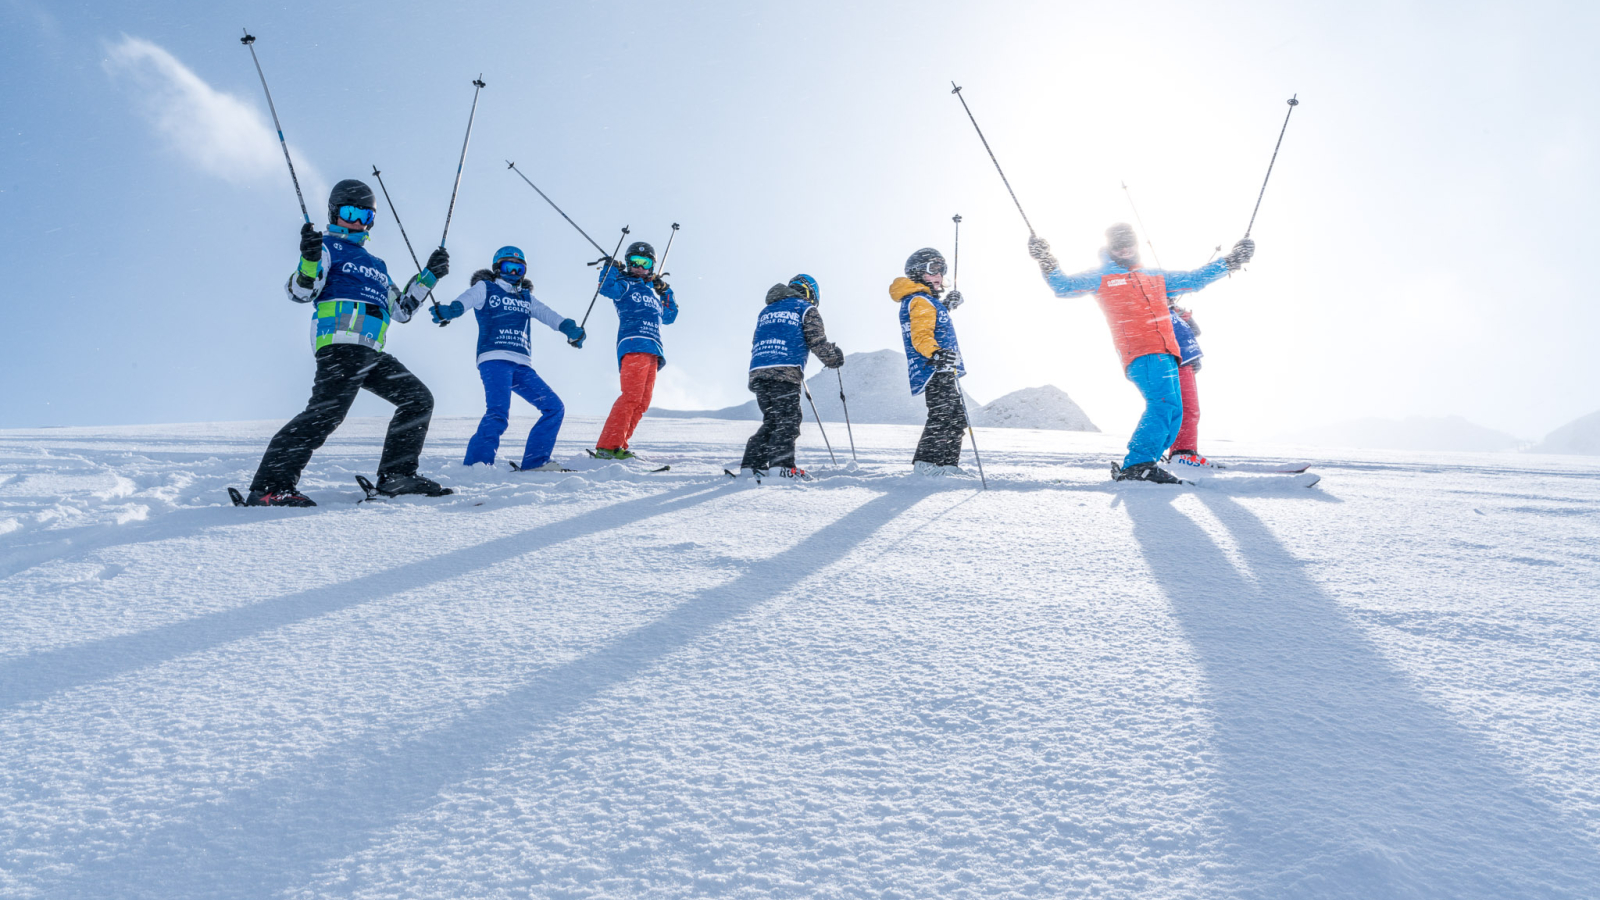 Are your teens too cool for (ski) school? Choose Pro Rider for freestyle, slalom and off-piste; Race Academy for budding ski racers or teen clinics for social skiiing.